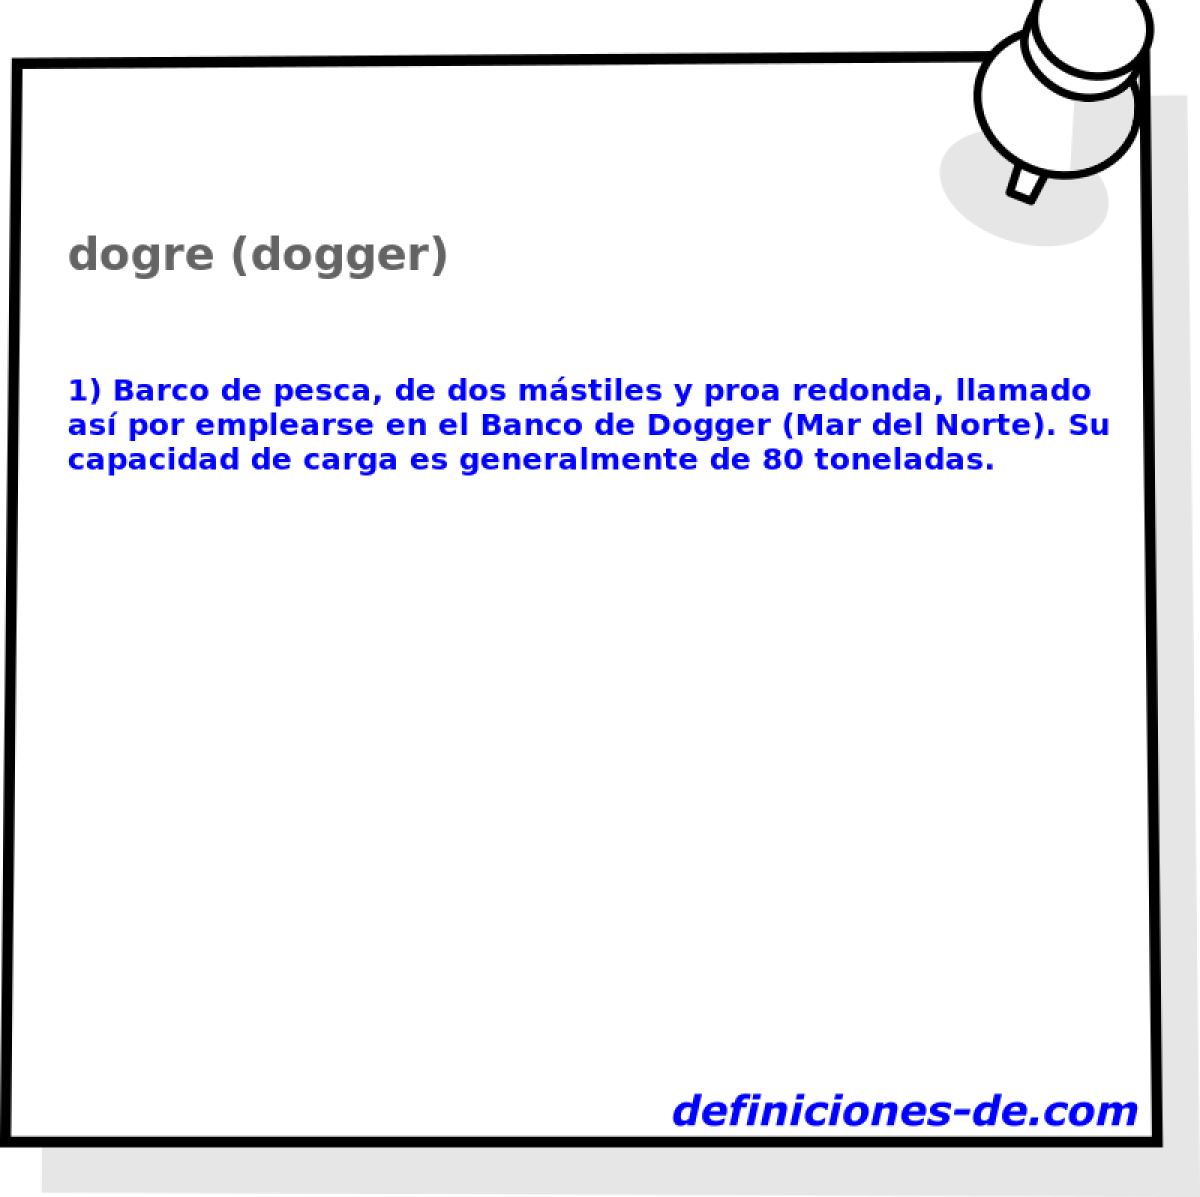 dogre (dogger) 